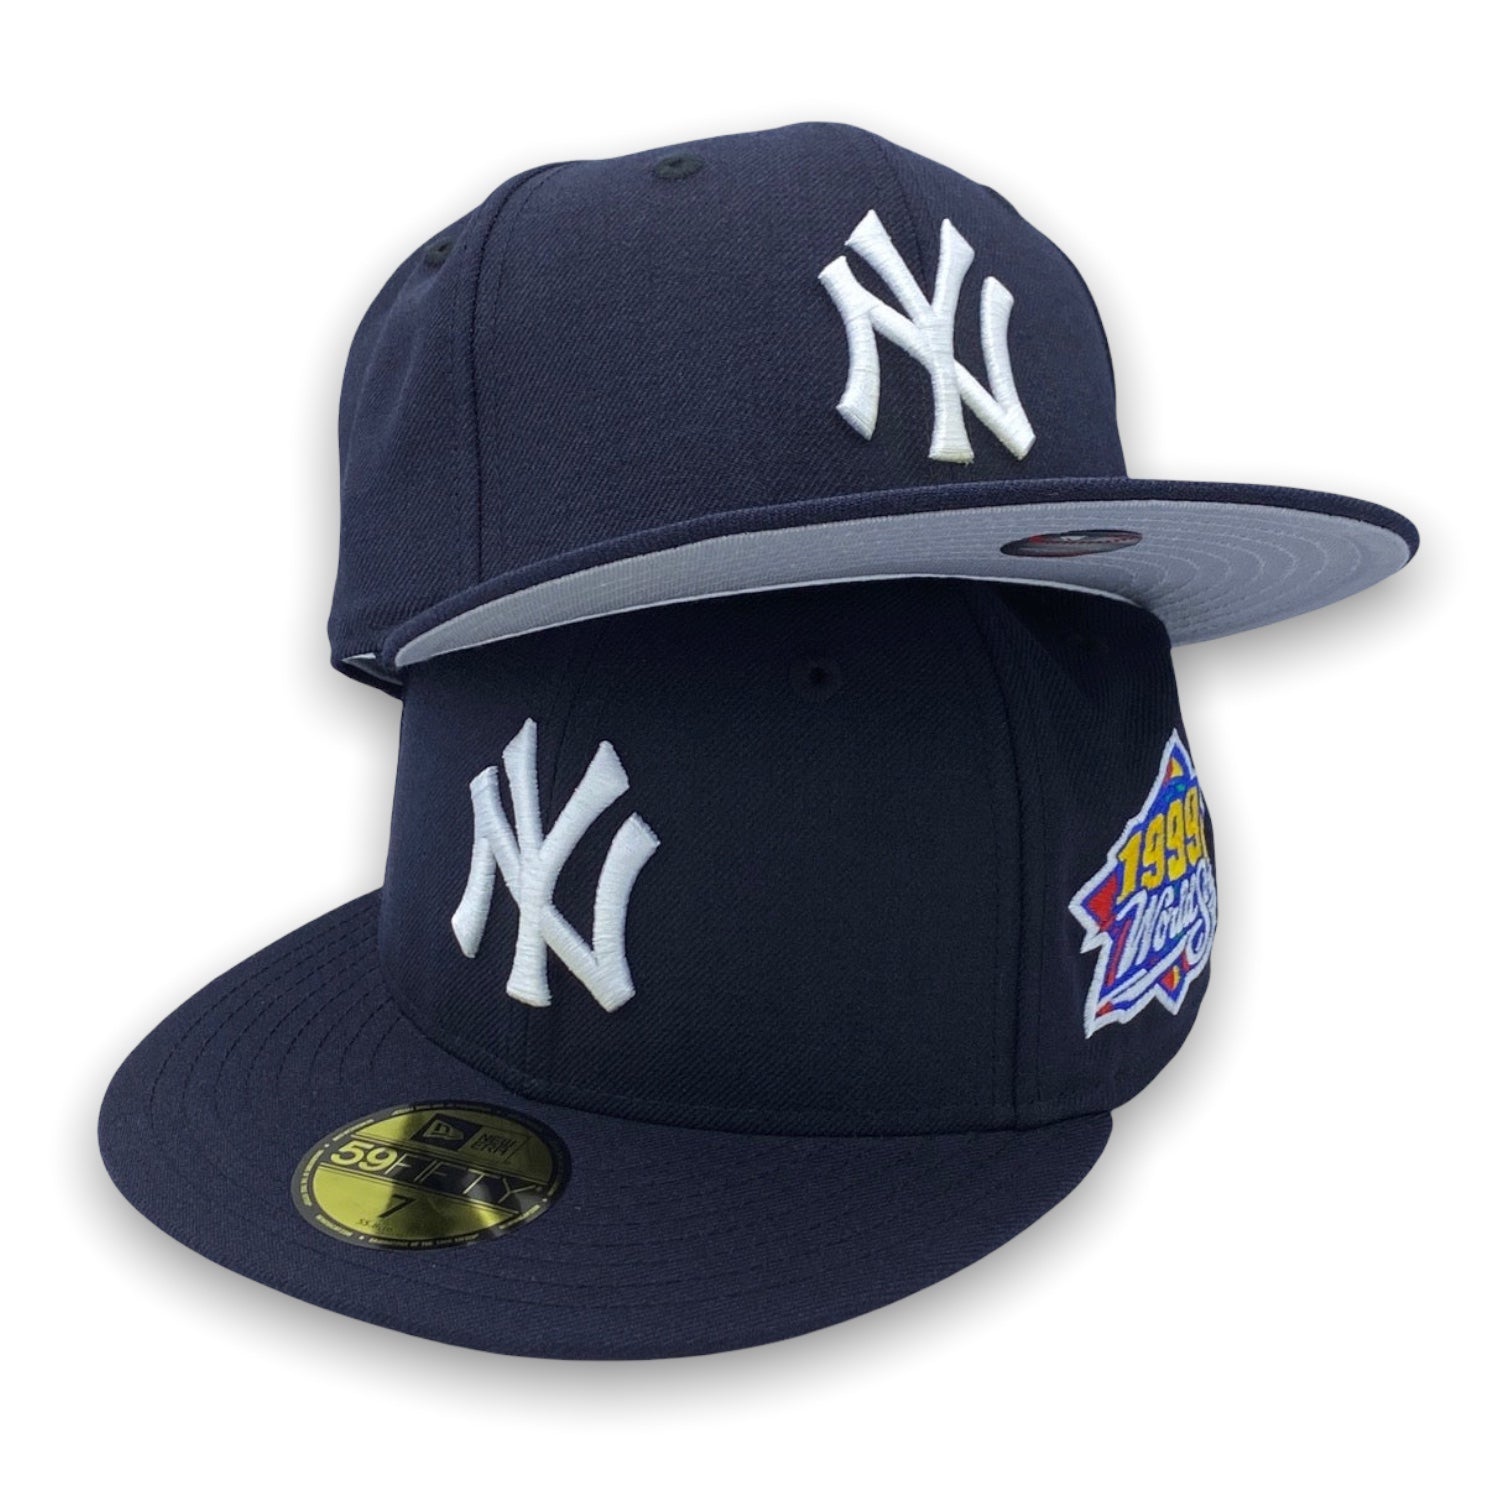 Fitted Ha CAP New 1999 59FIFTY USA – World Navy Series New Era KING Yankees Blue York